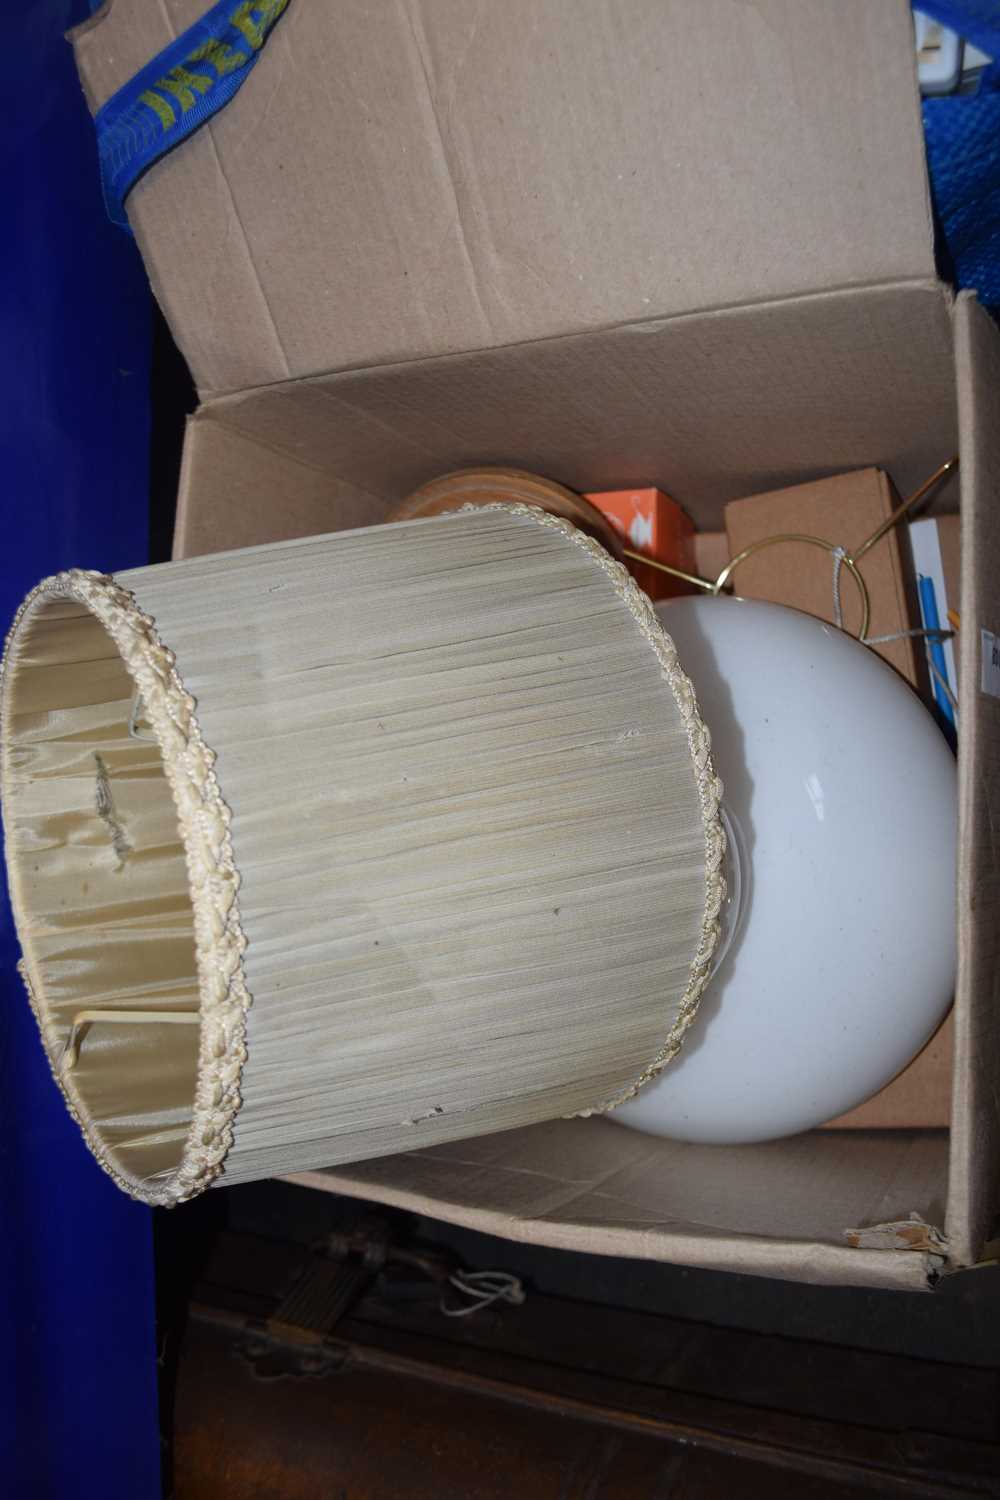 One box containing a modern oil lamp, table lamp etc